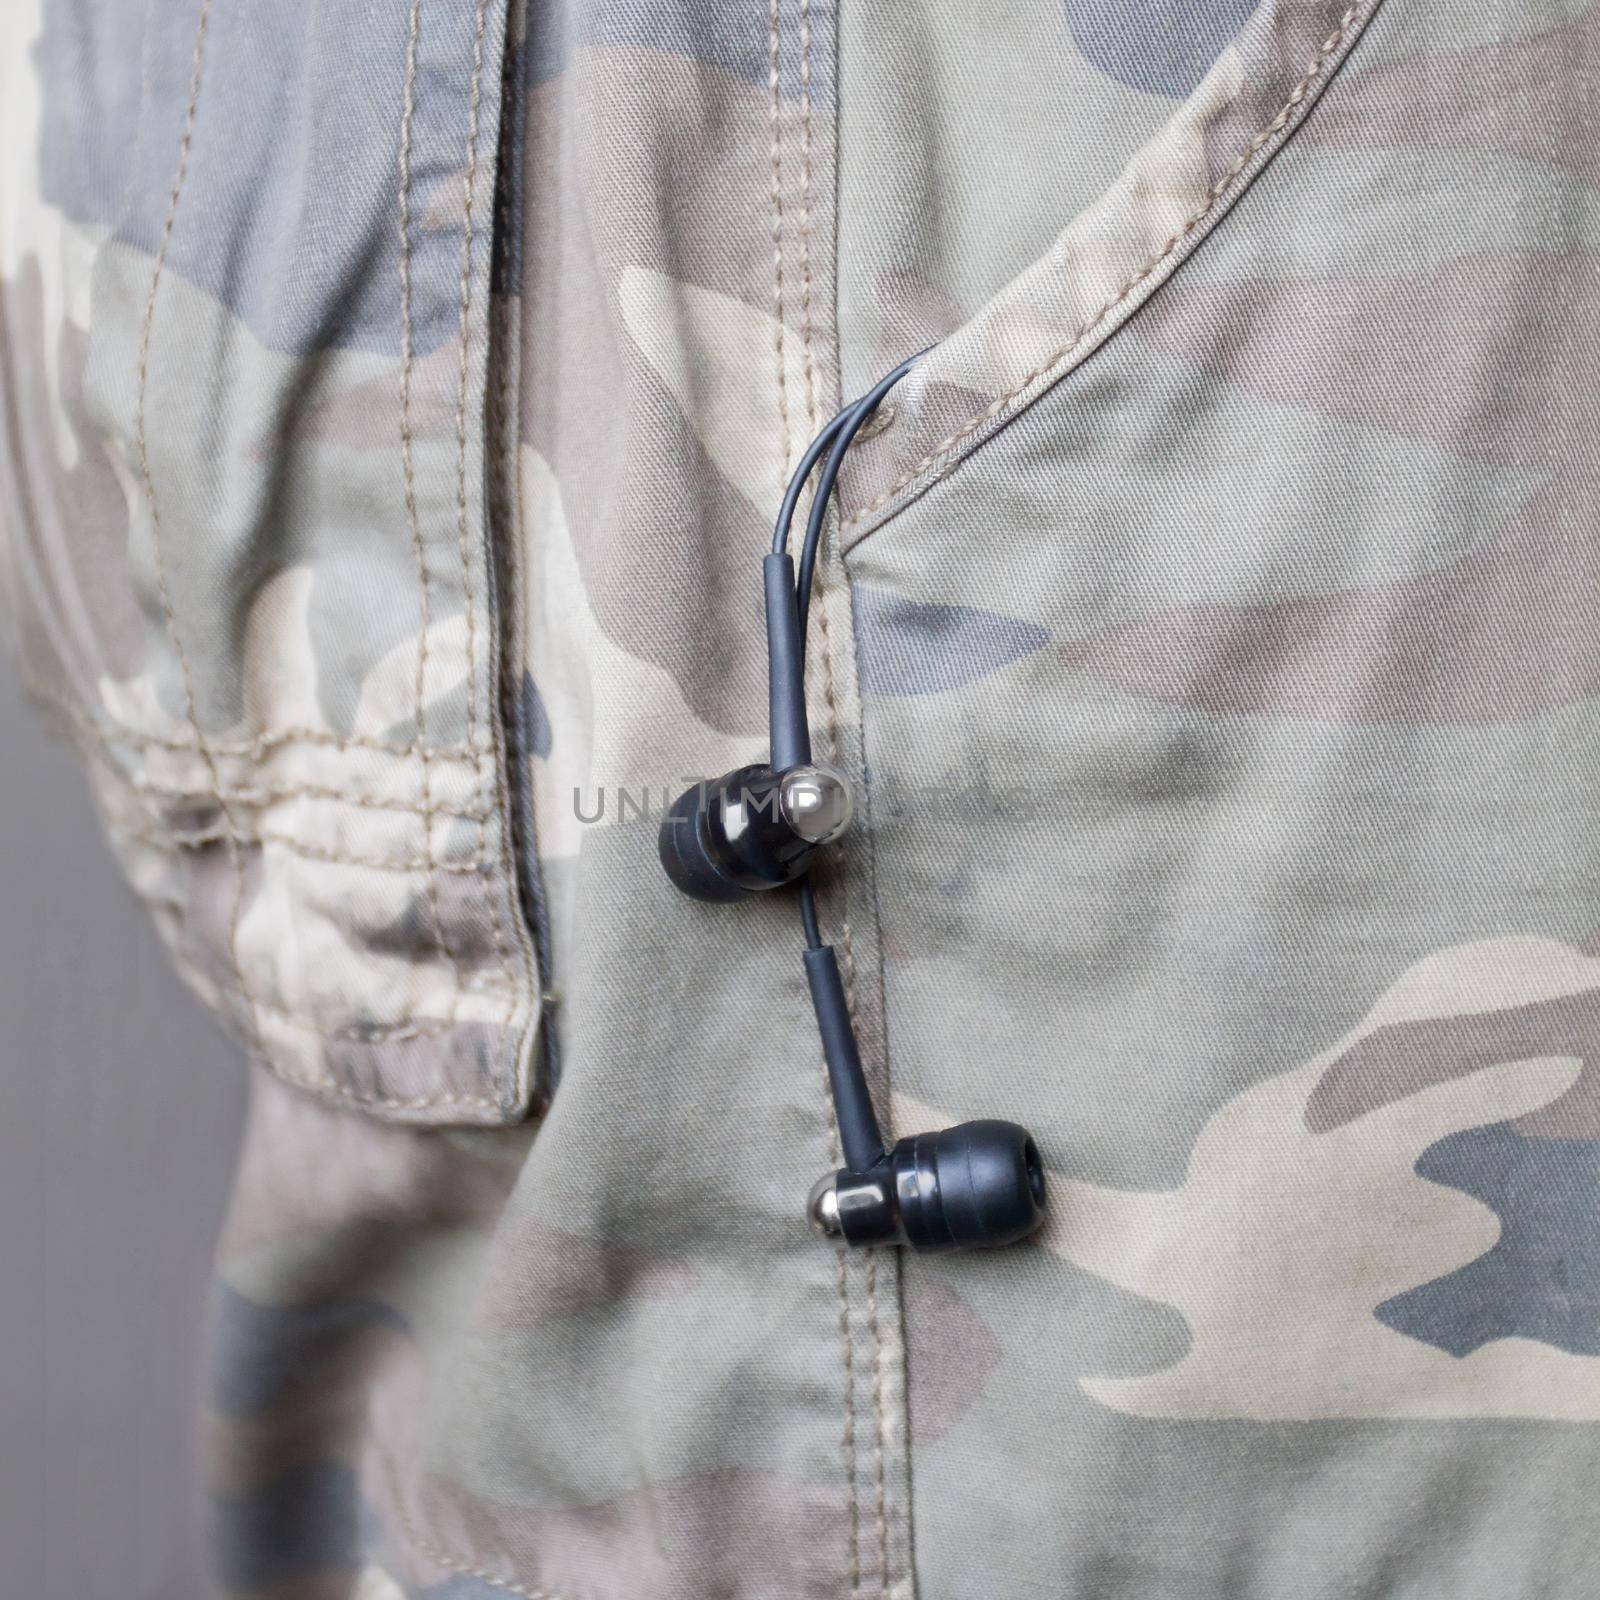 Ear phones hanging out of pocket by alexAleksei